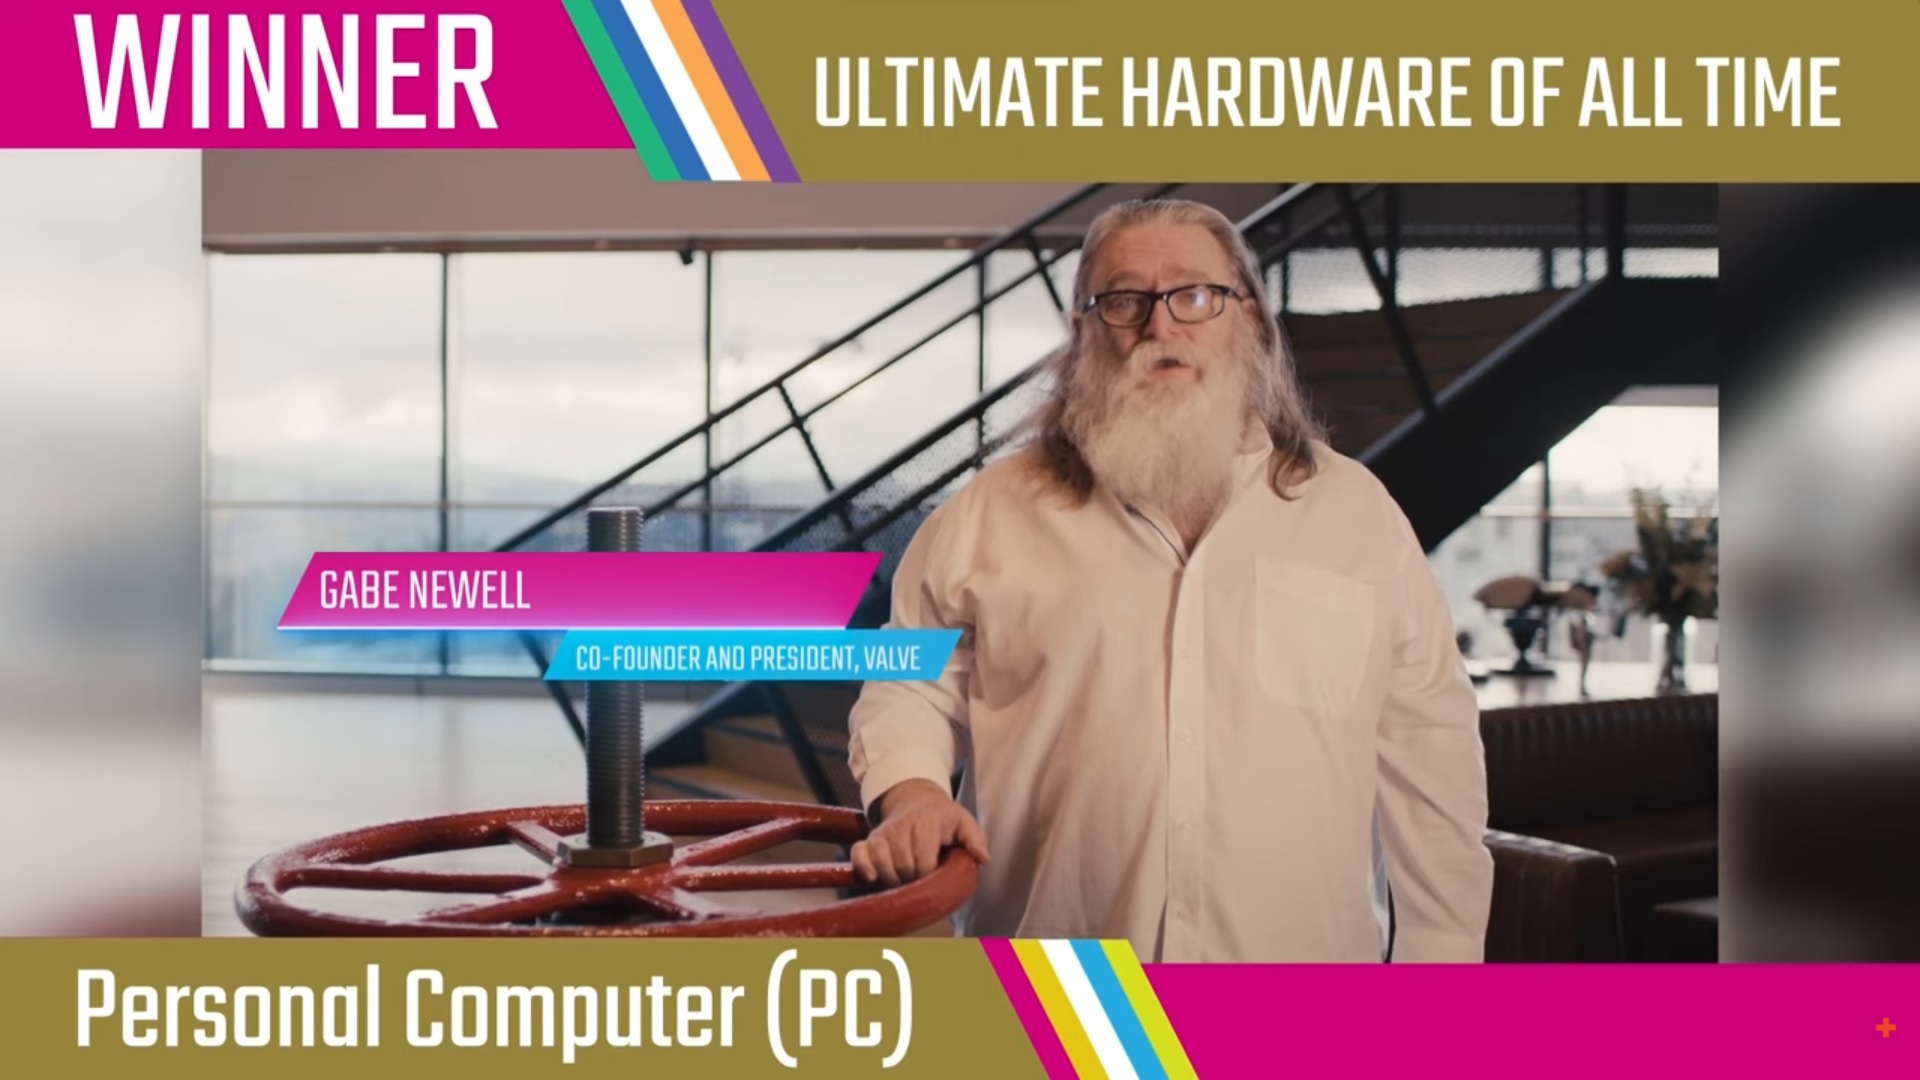 Gabe Newell accepta ,,Ultimate Hardware of All Time", castigat de PC